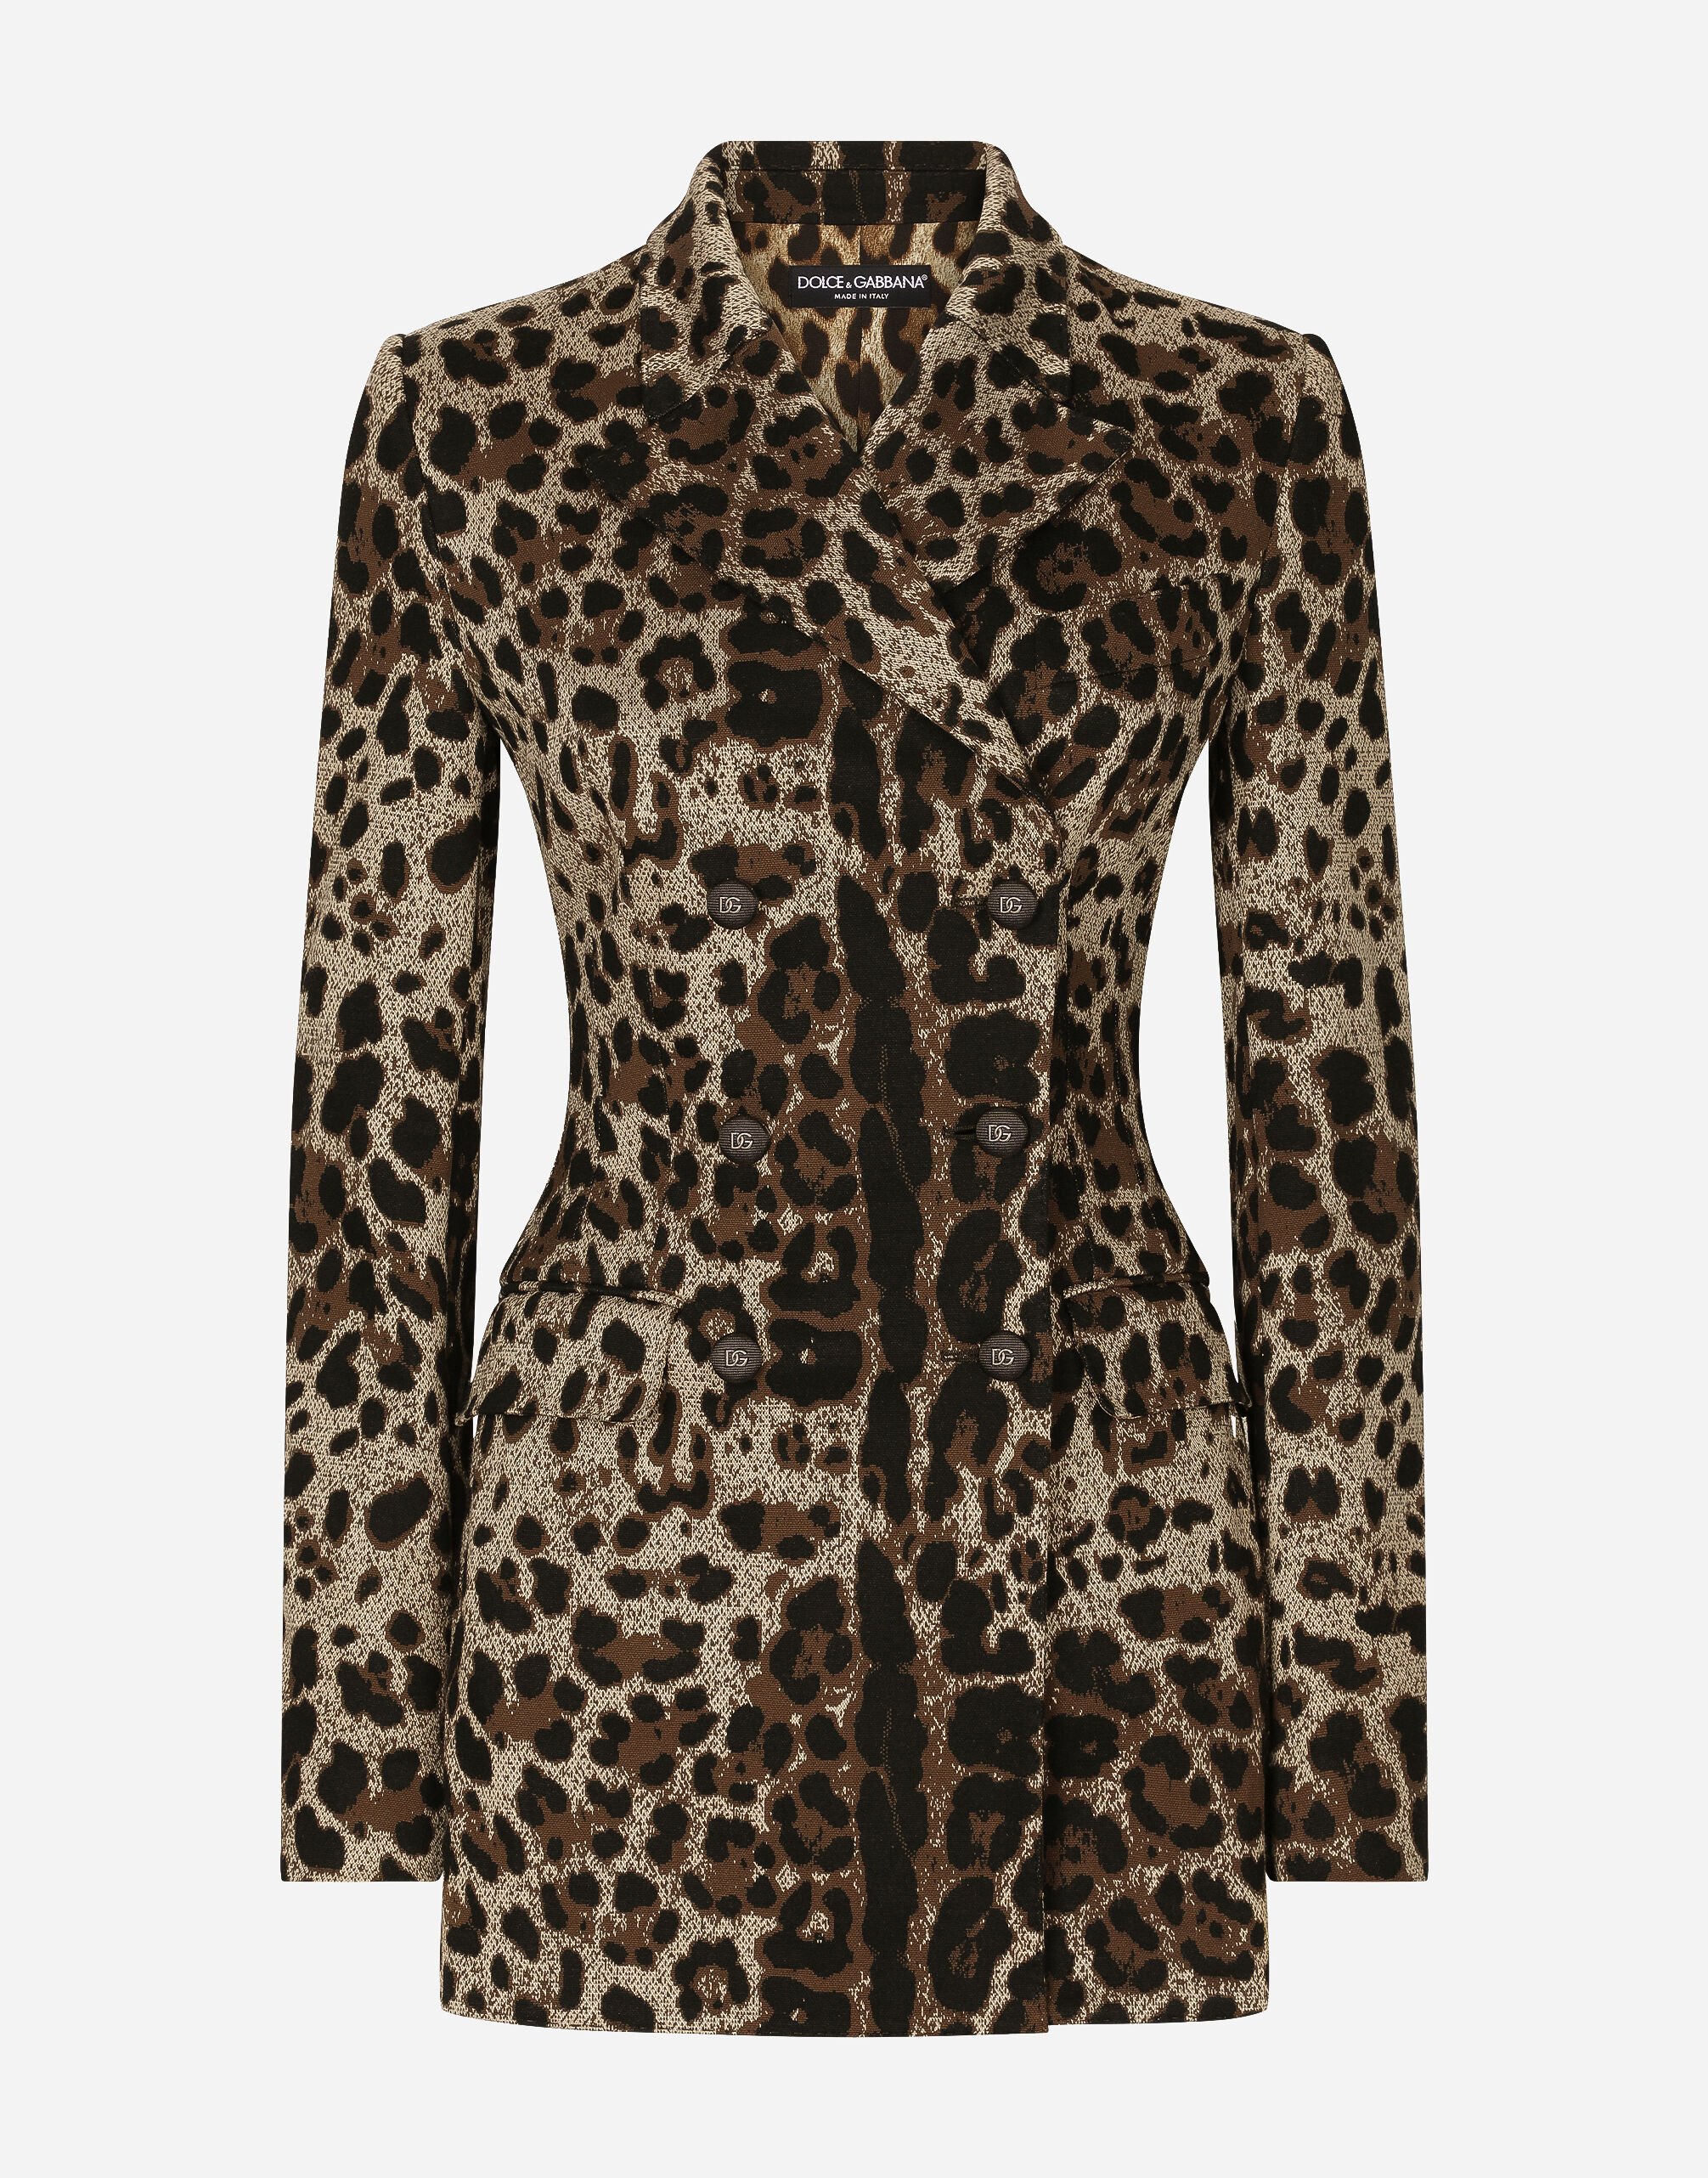 Dolce&Gabbana Double-breasted wool Turlington jacket with jacquard leopard design Animal Print BB6003AO043